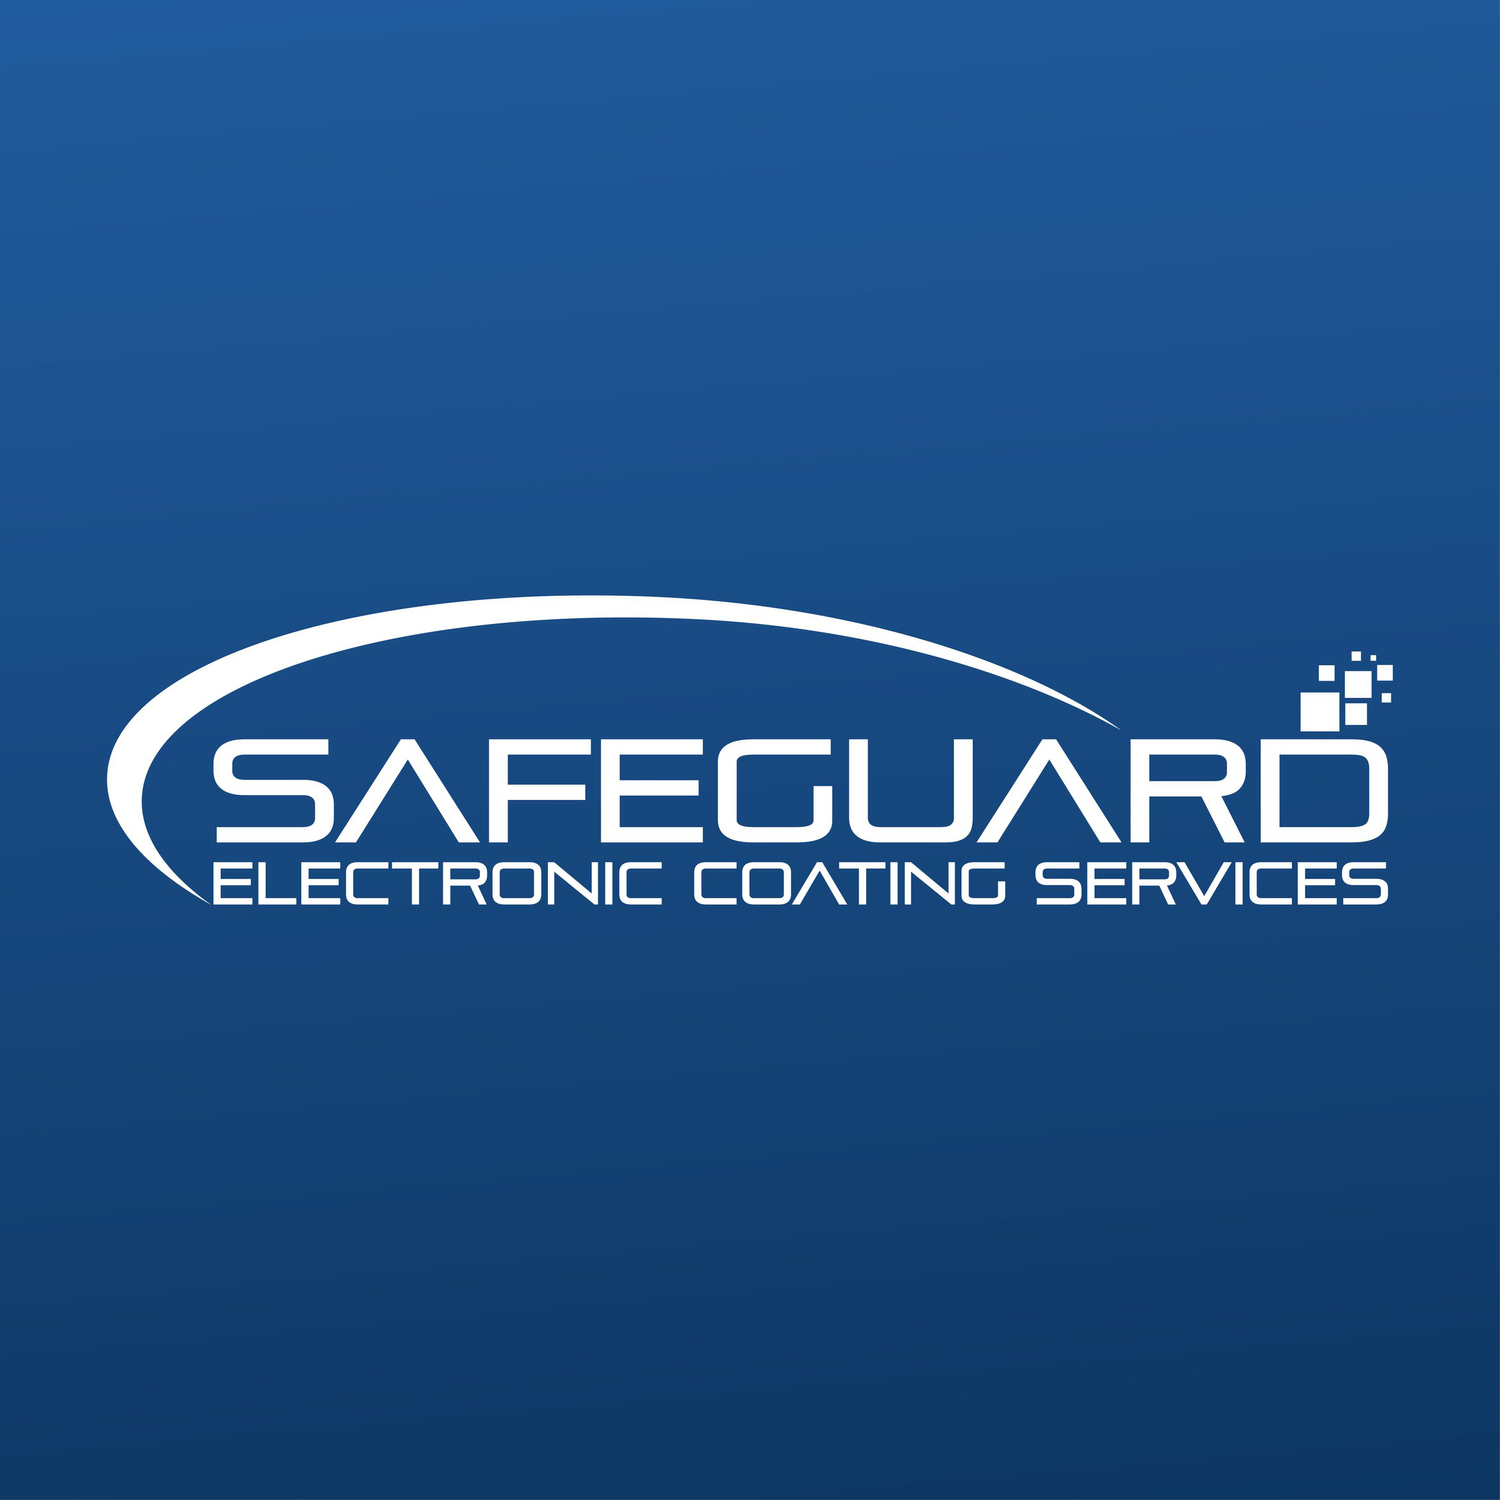 Safeguard Electronic Coating Services